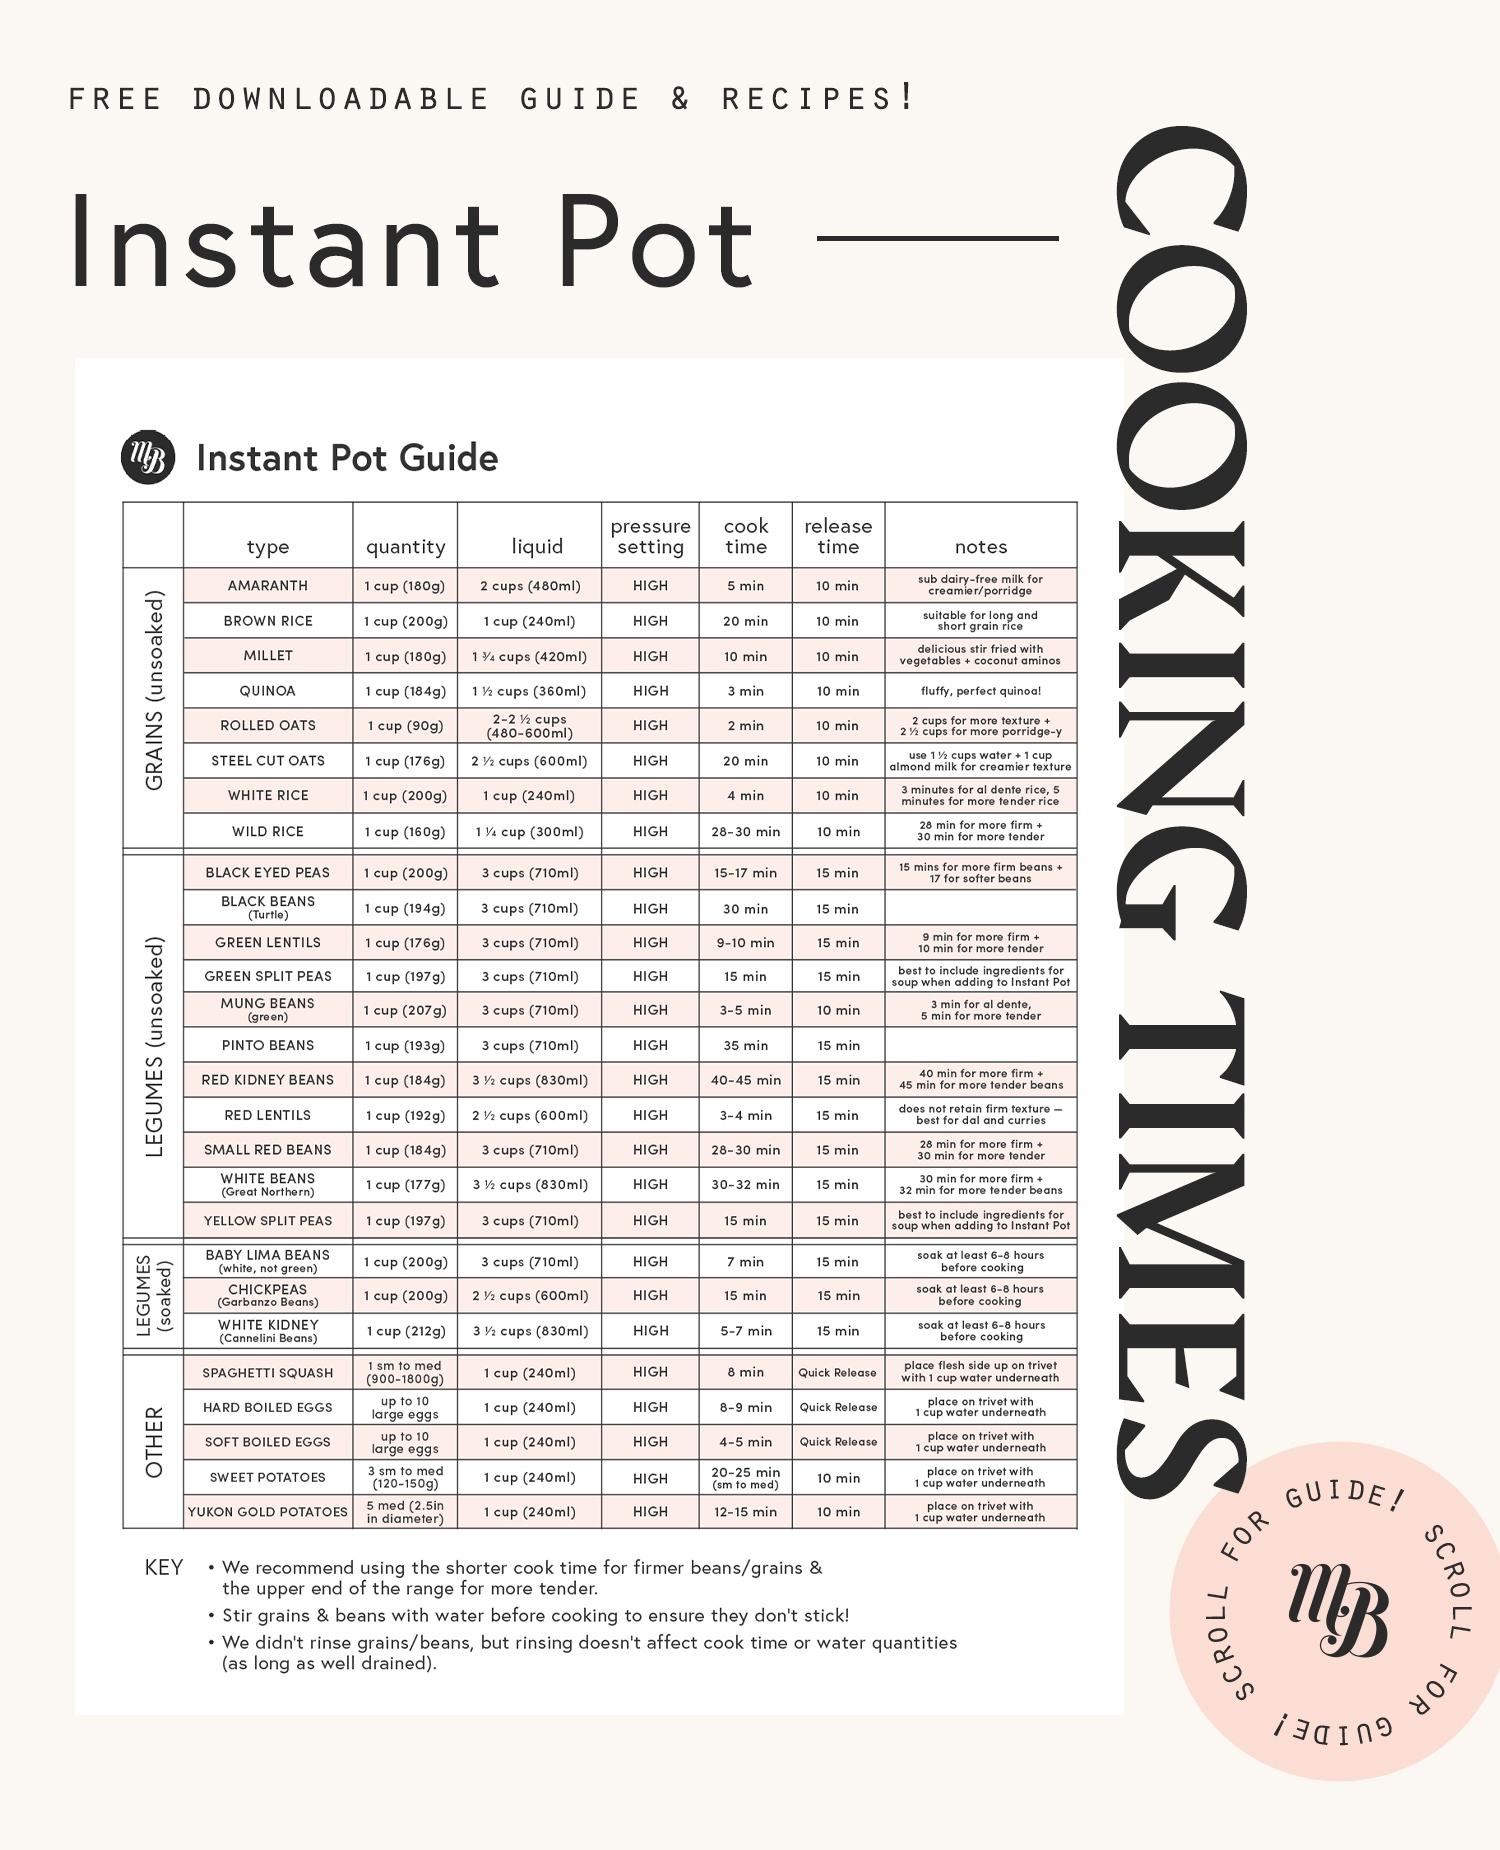 Instant Pot cooking times for perfect grains, beans, and more